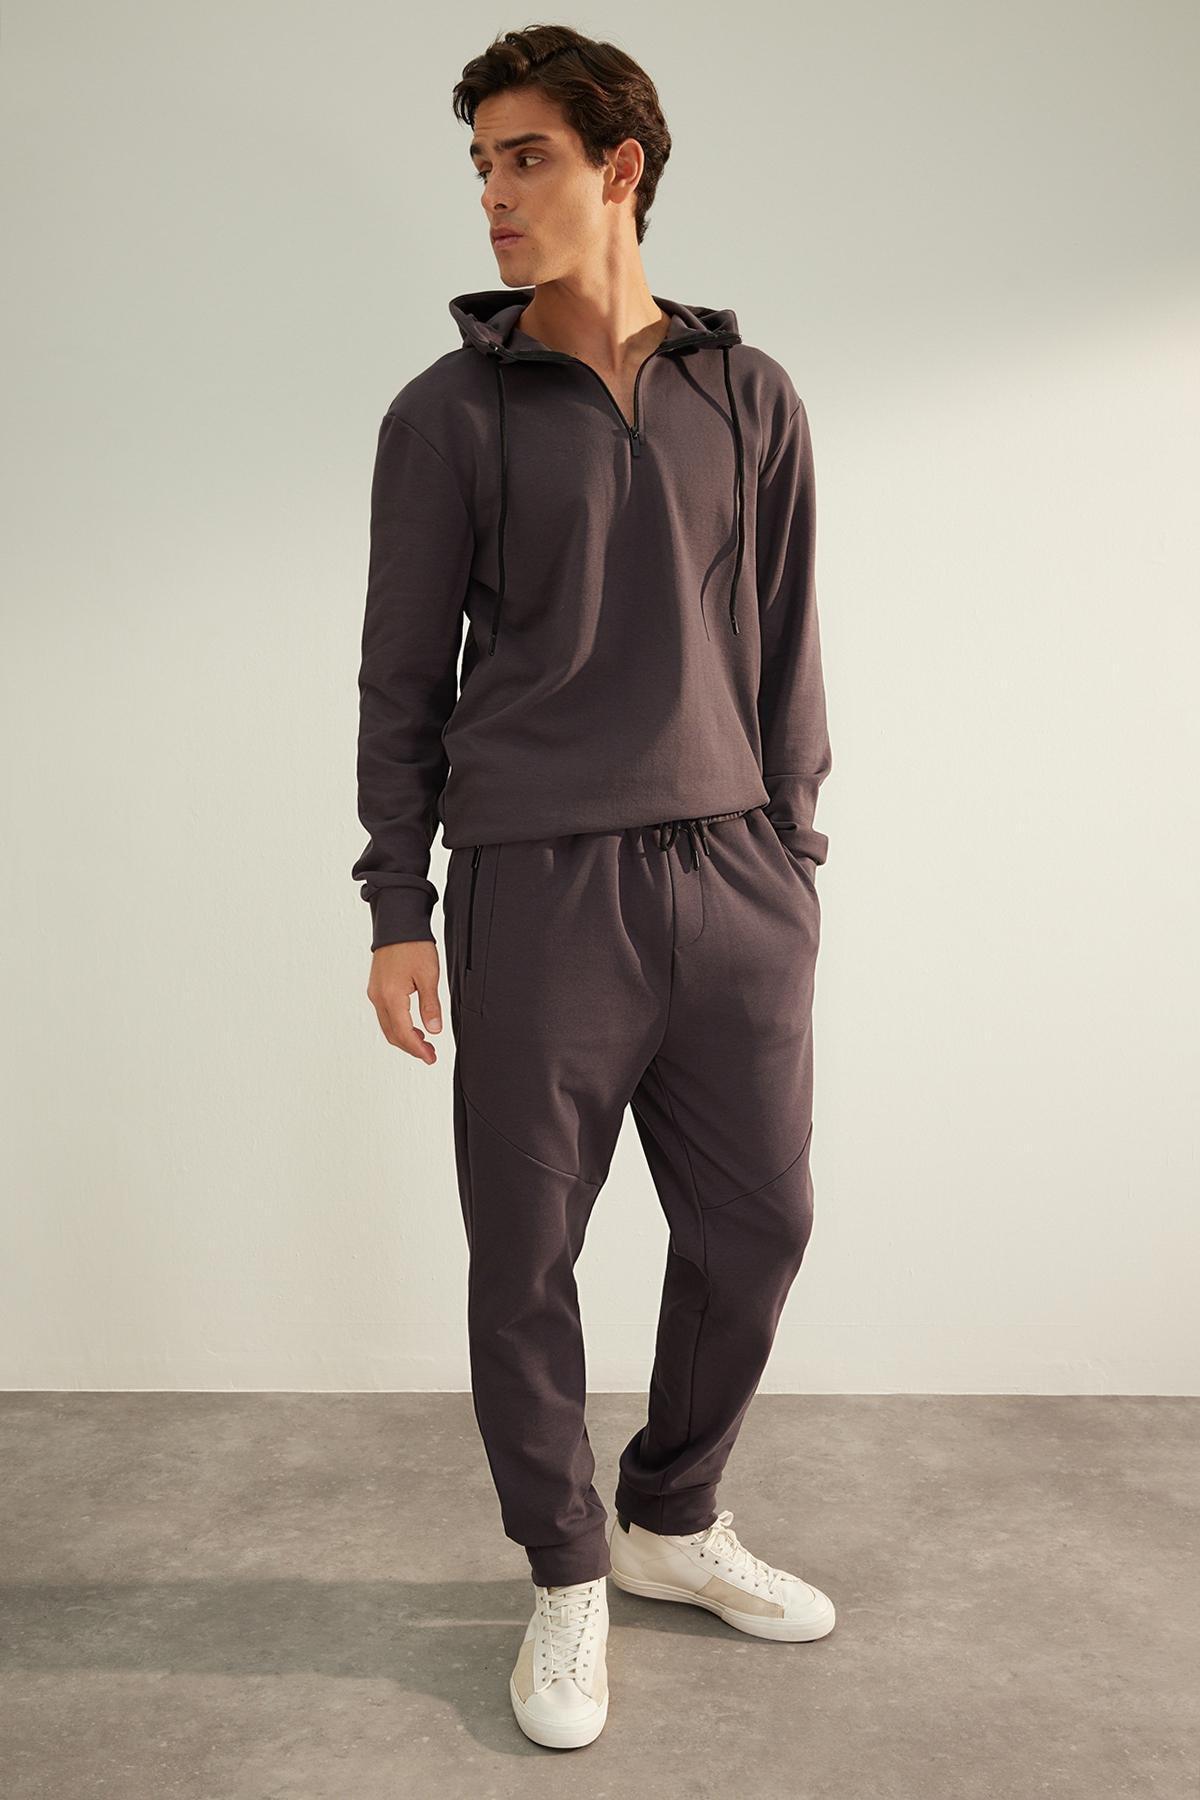 Trendyol - Grey Limited Edition Zippered Sweatpants